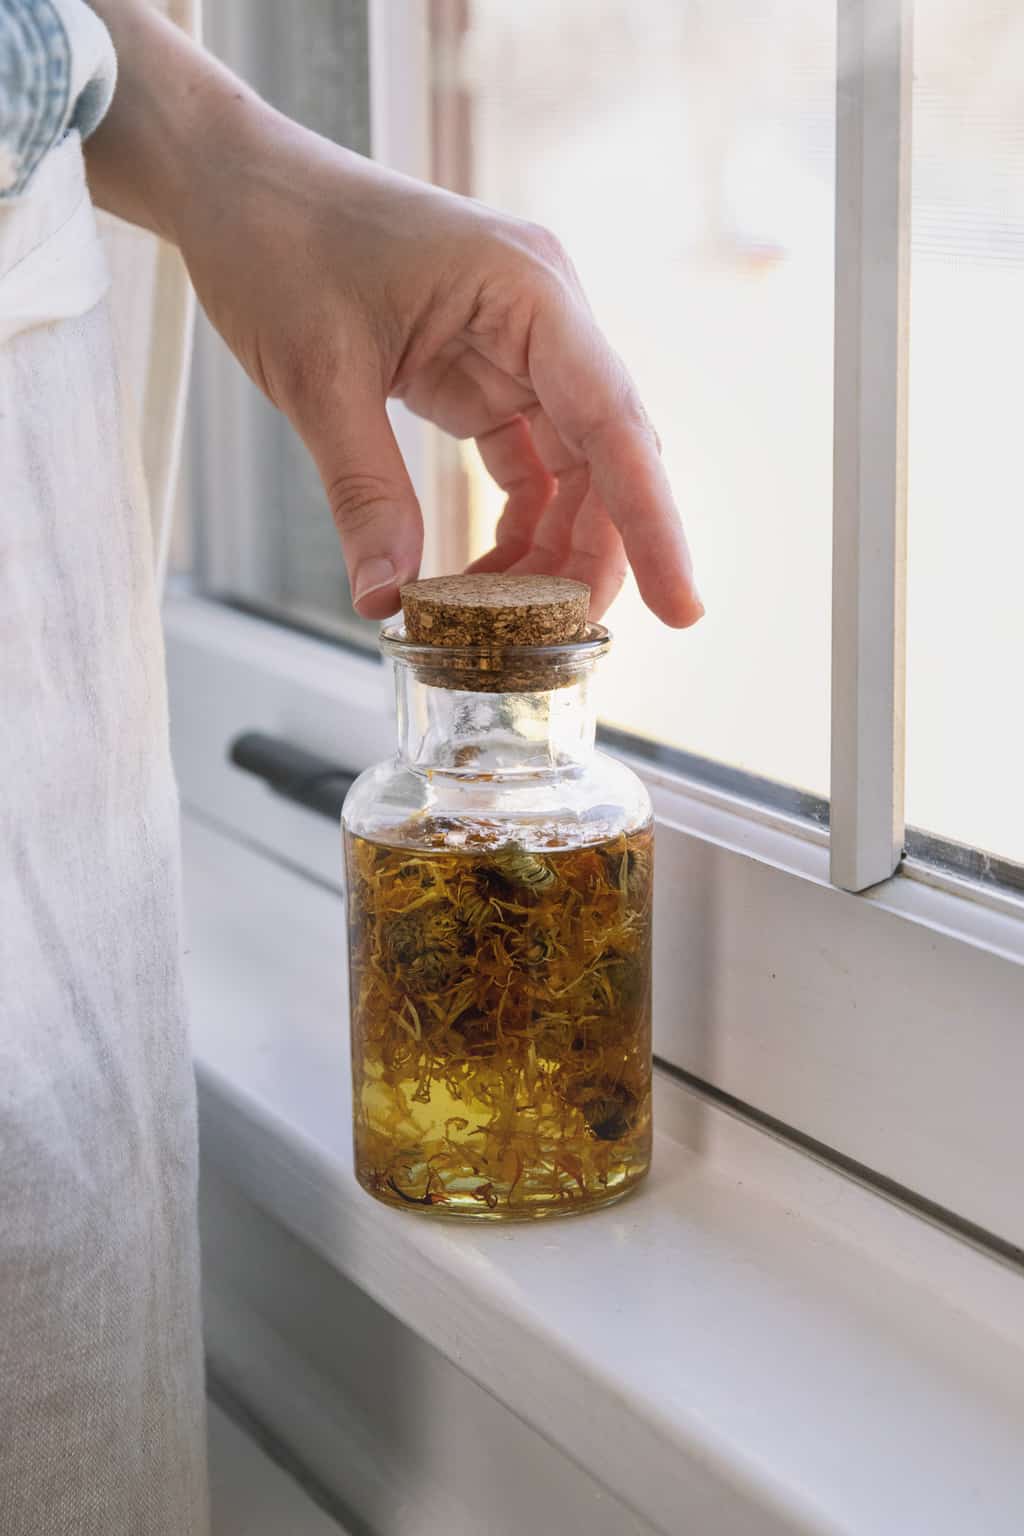 Let infused oil sit for 1-2 weeks before using in herbal salve recipes